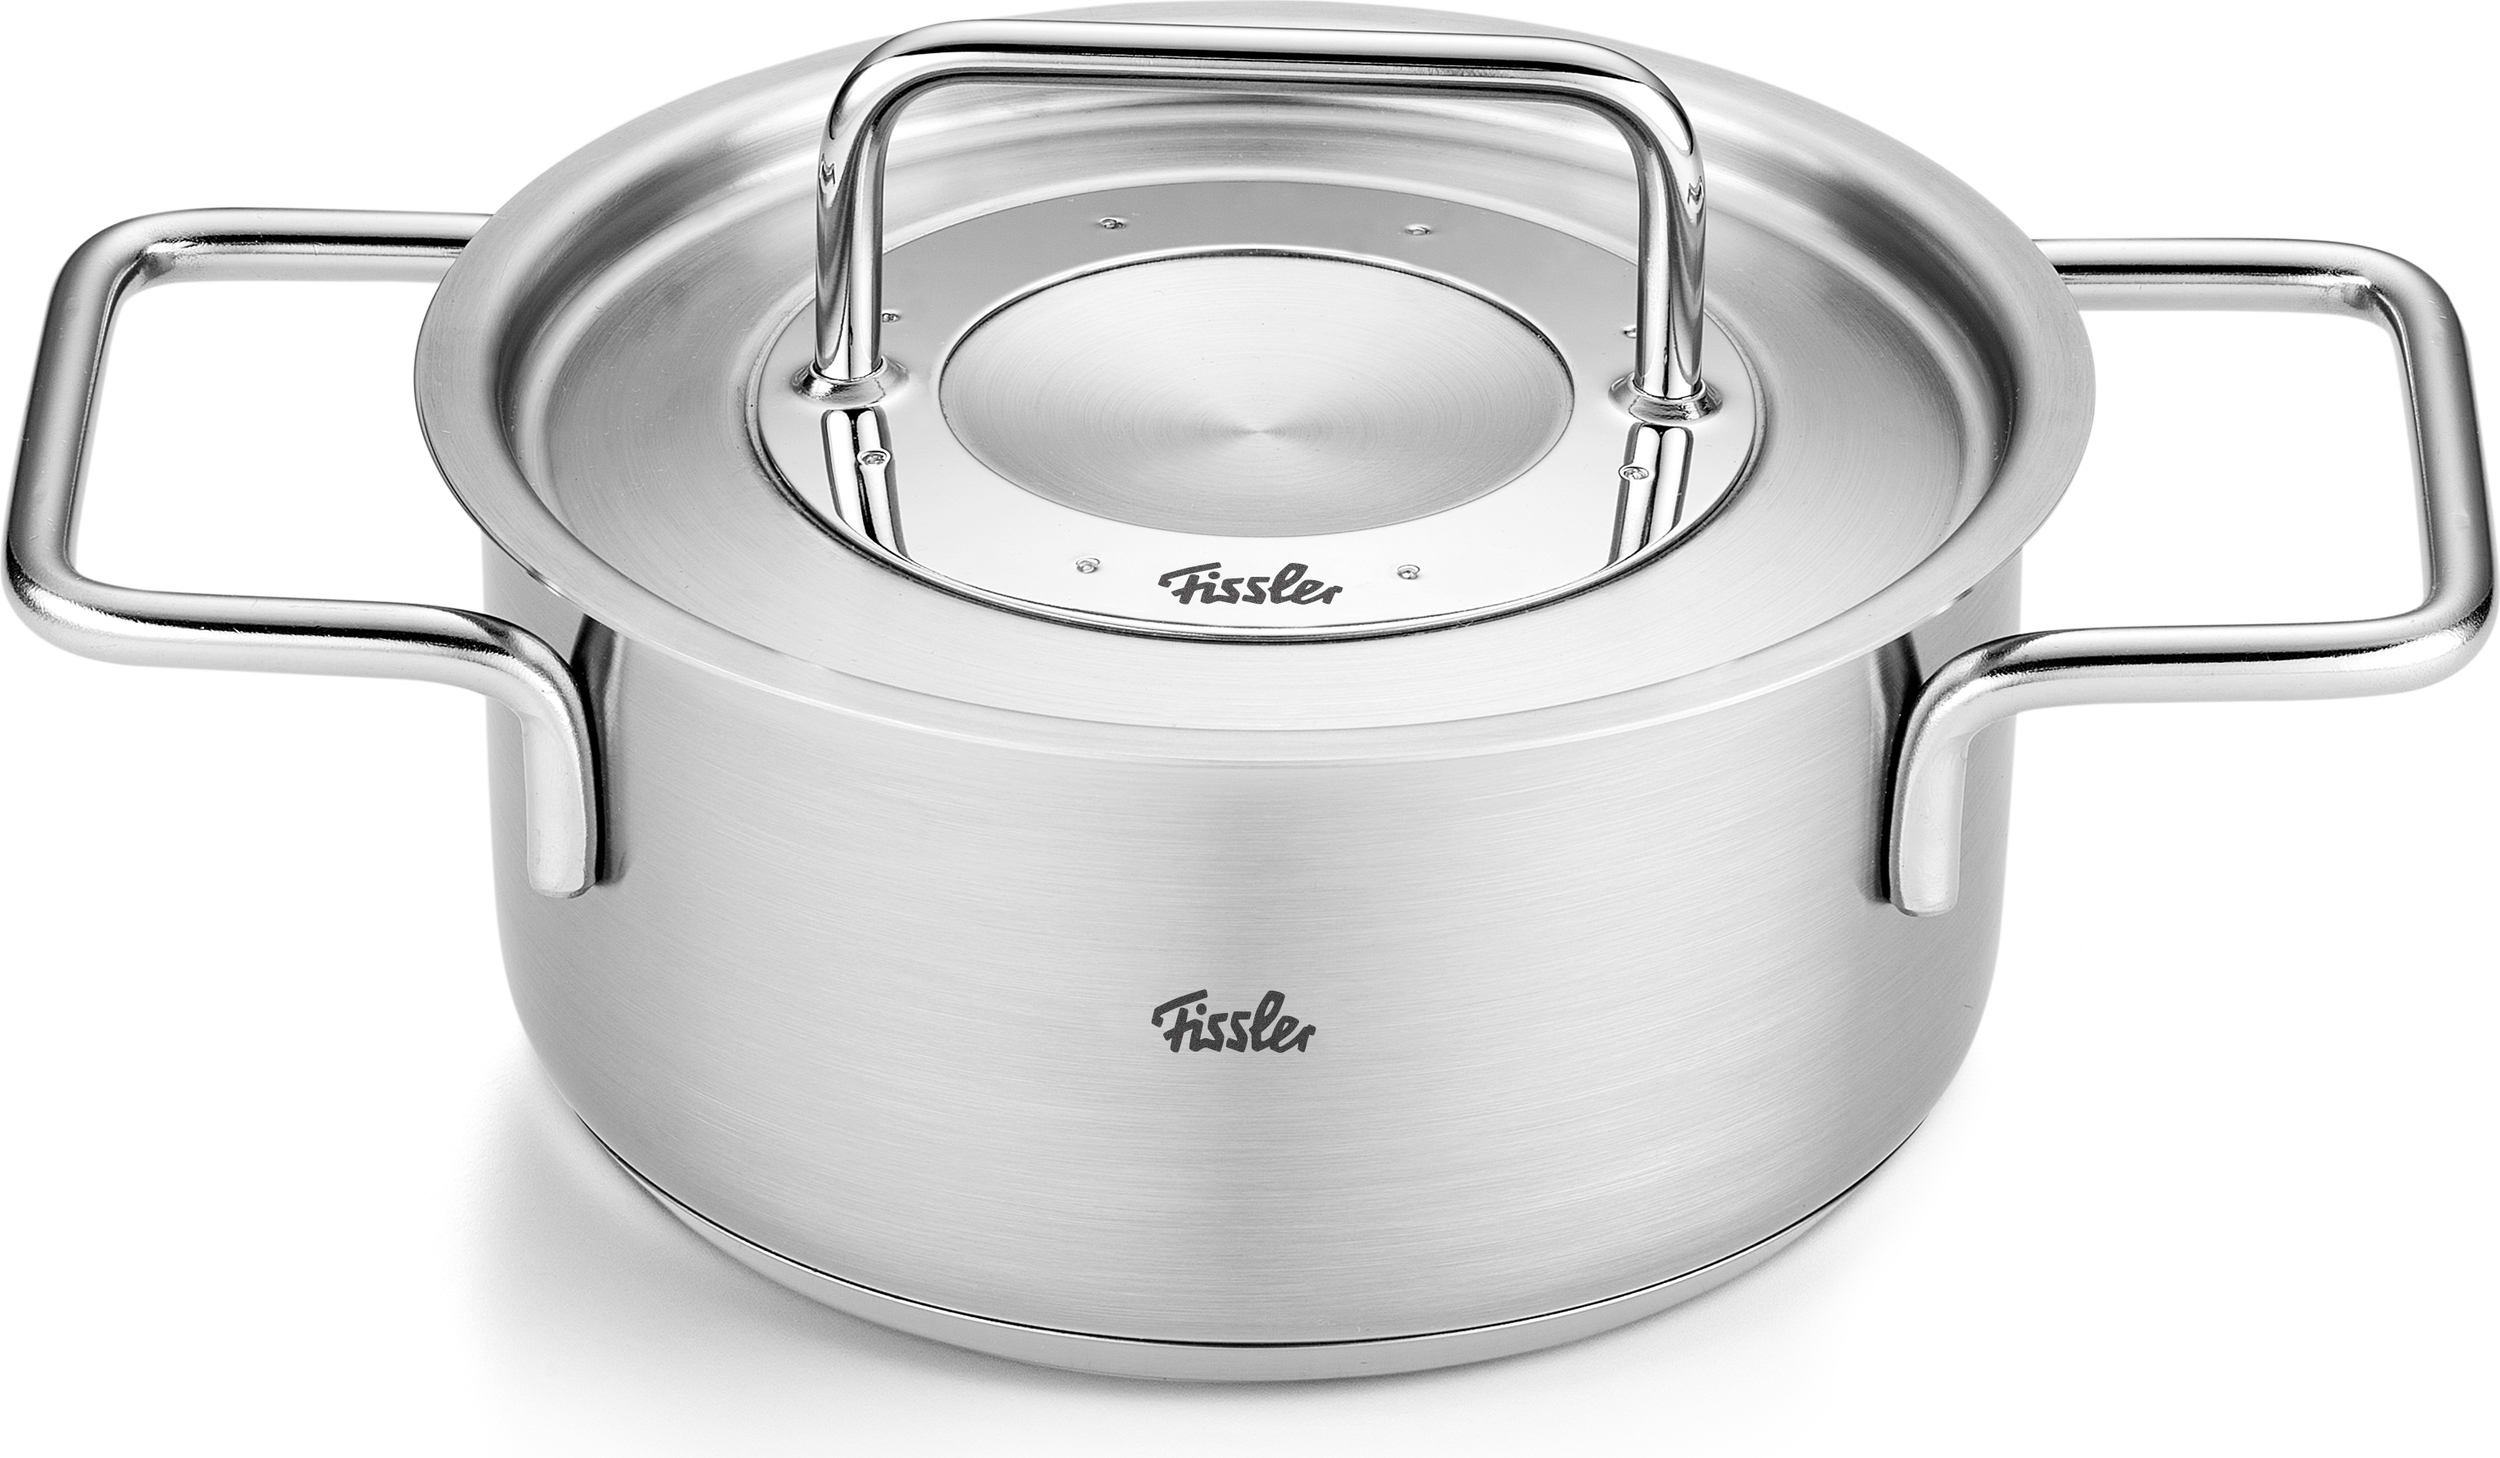 Pure - hoch Topf Collection | FormAdore 086-114-16-000/0 Fissler